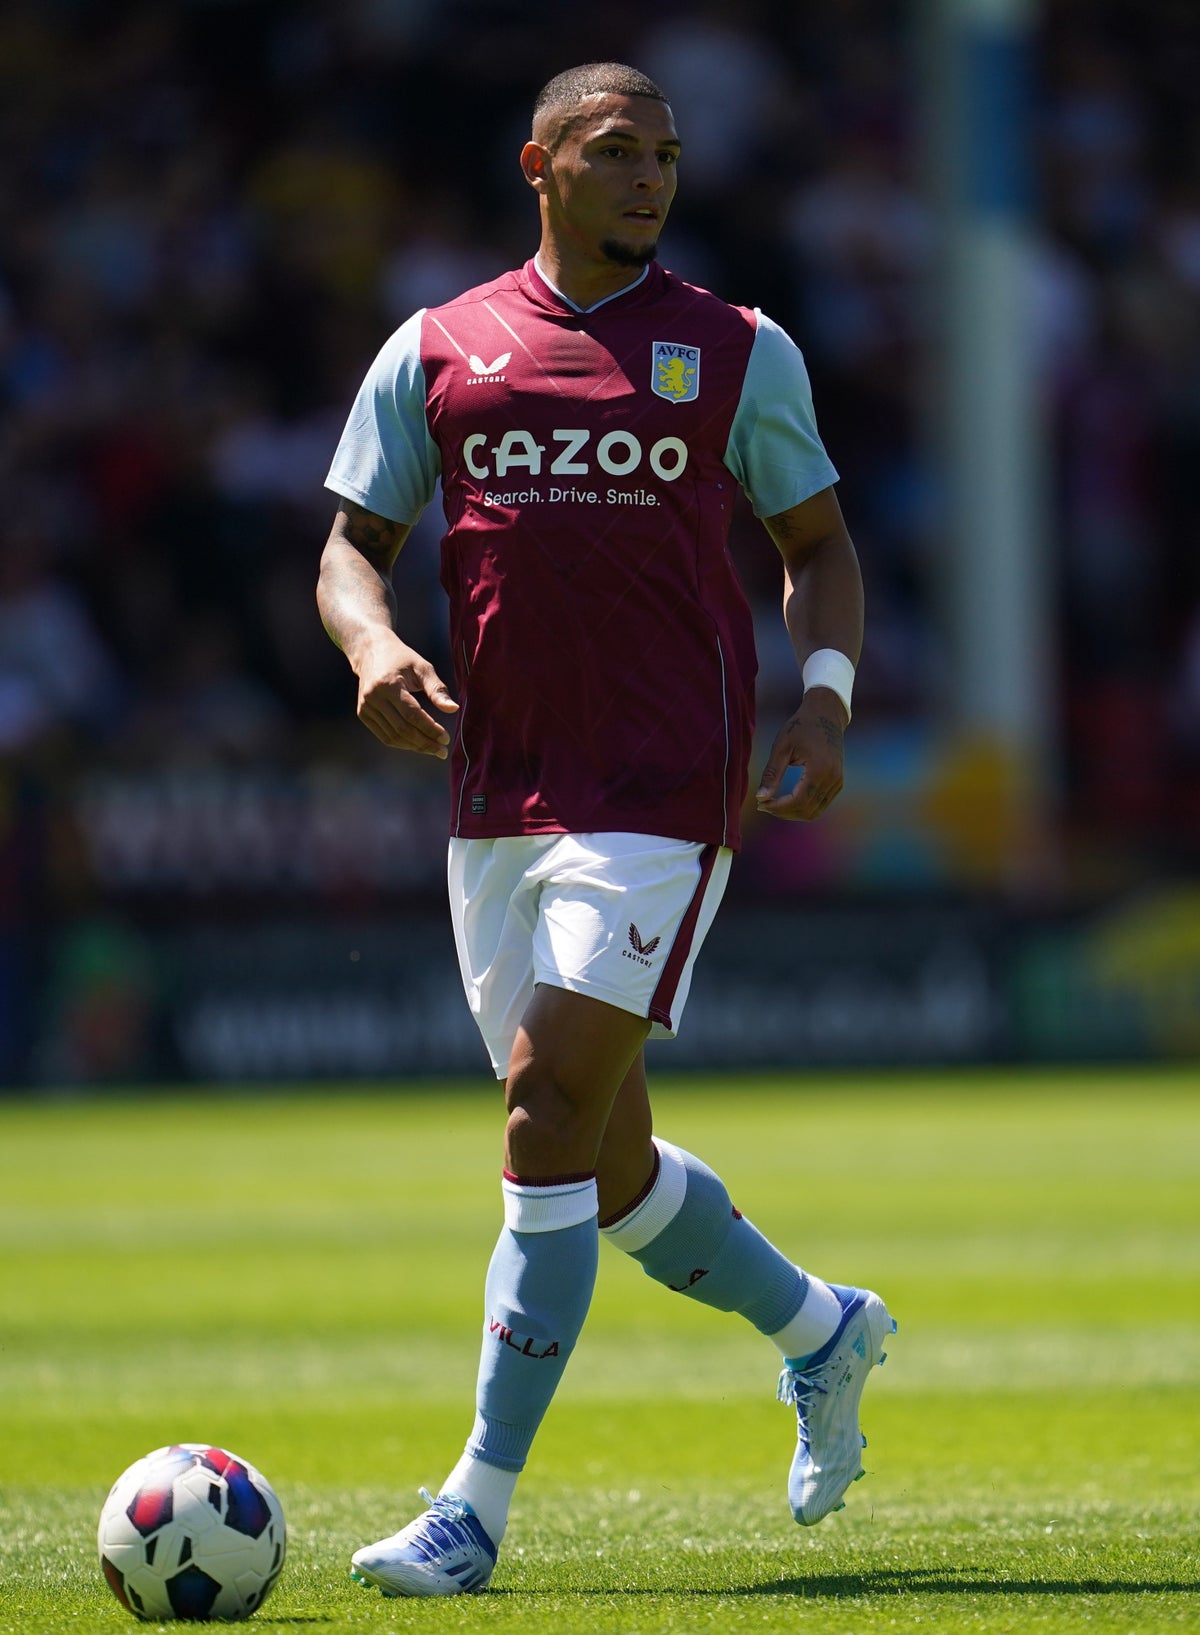 Injury blow for Aston Villa as summer signing Diego Carlos ruptures Achilles